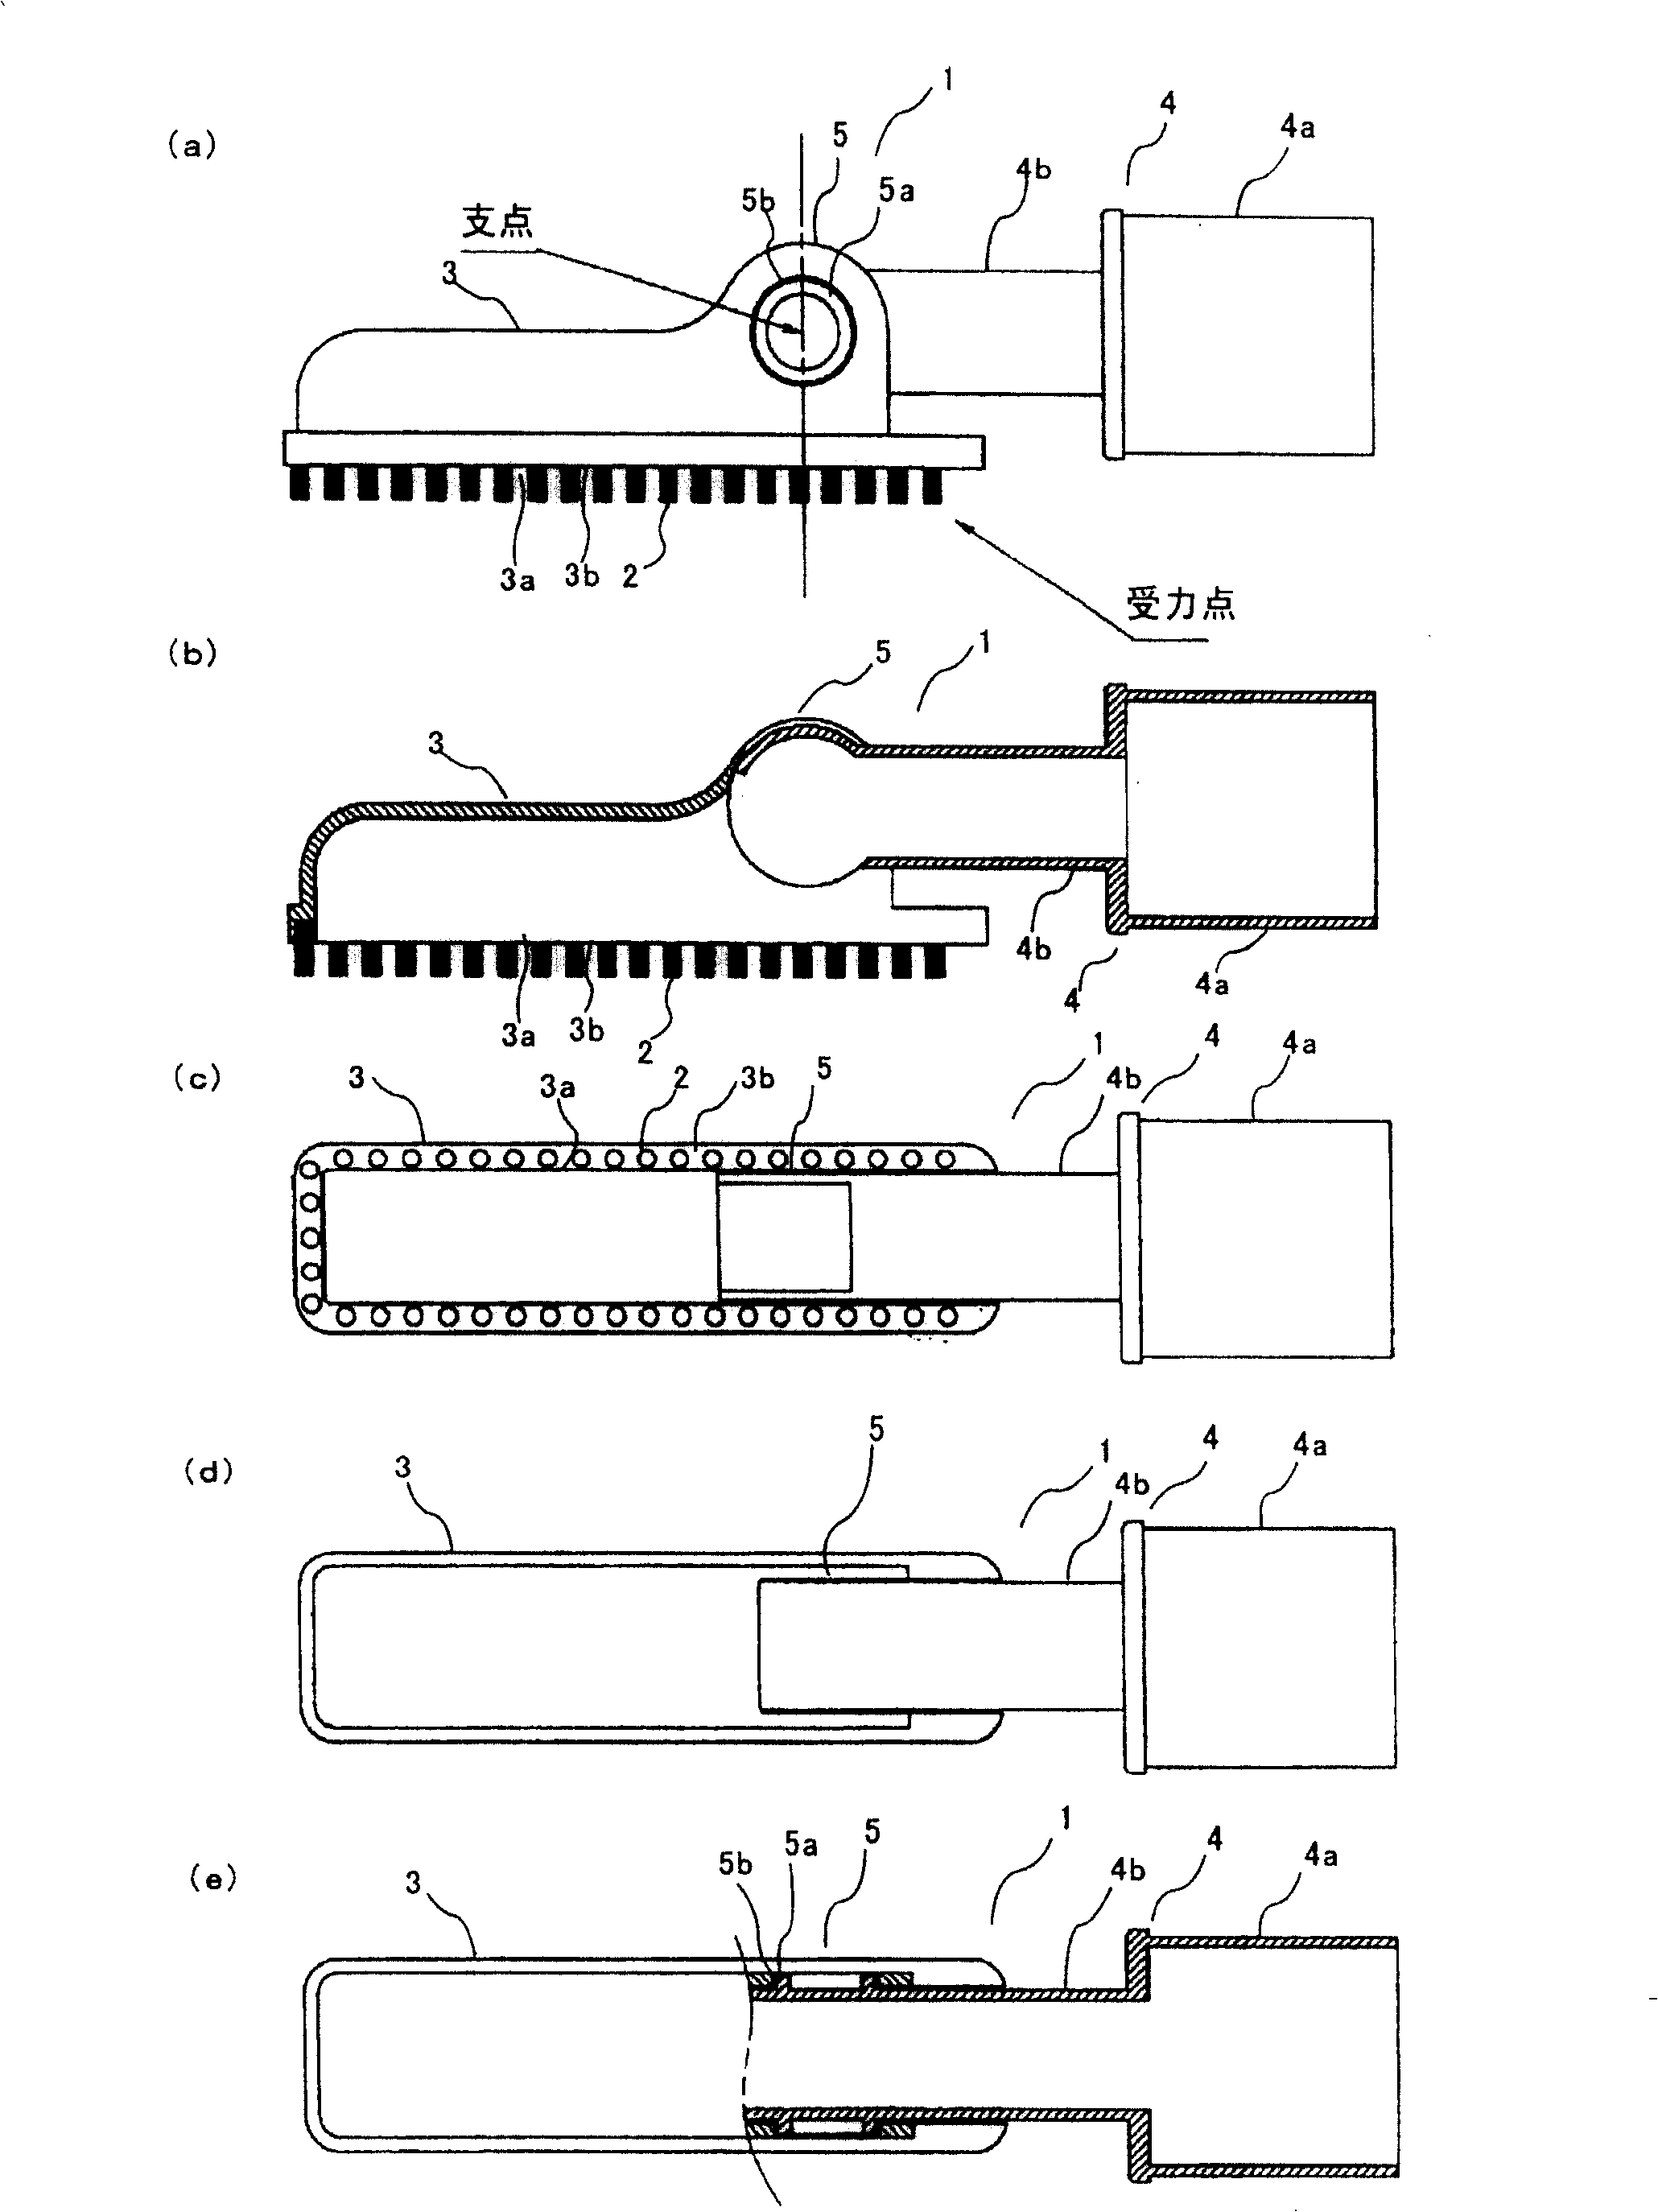 Auxiliary device of dust collector